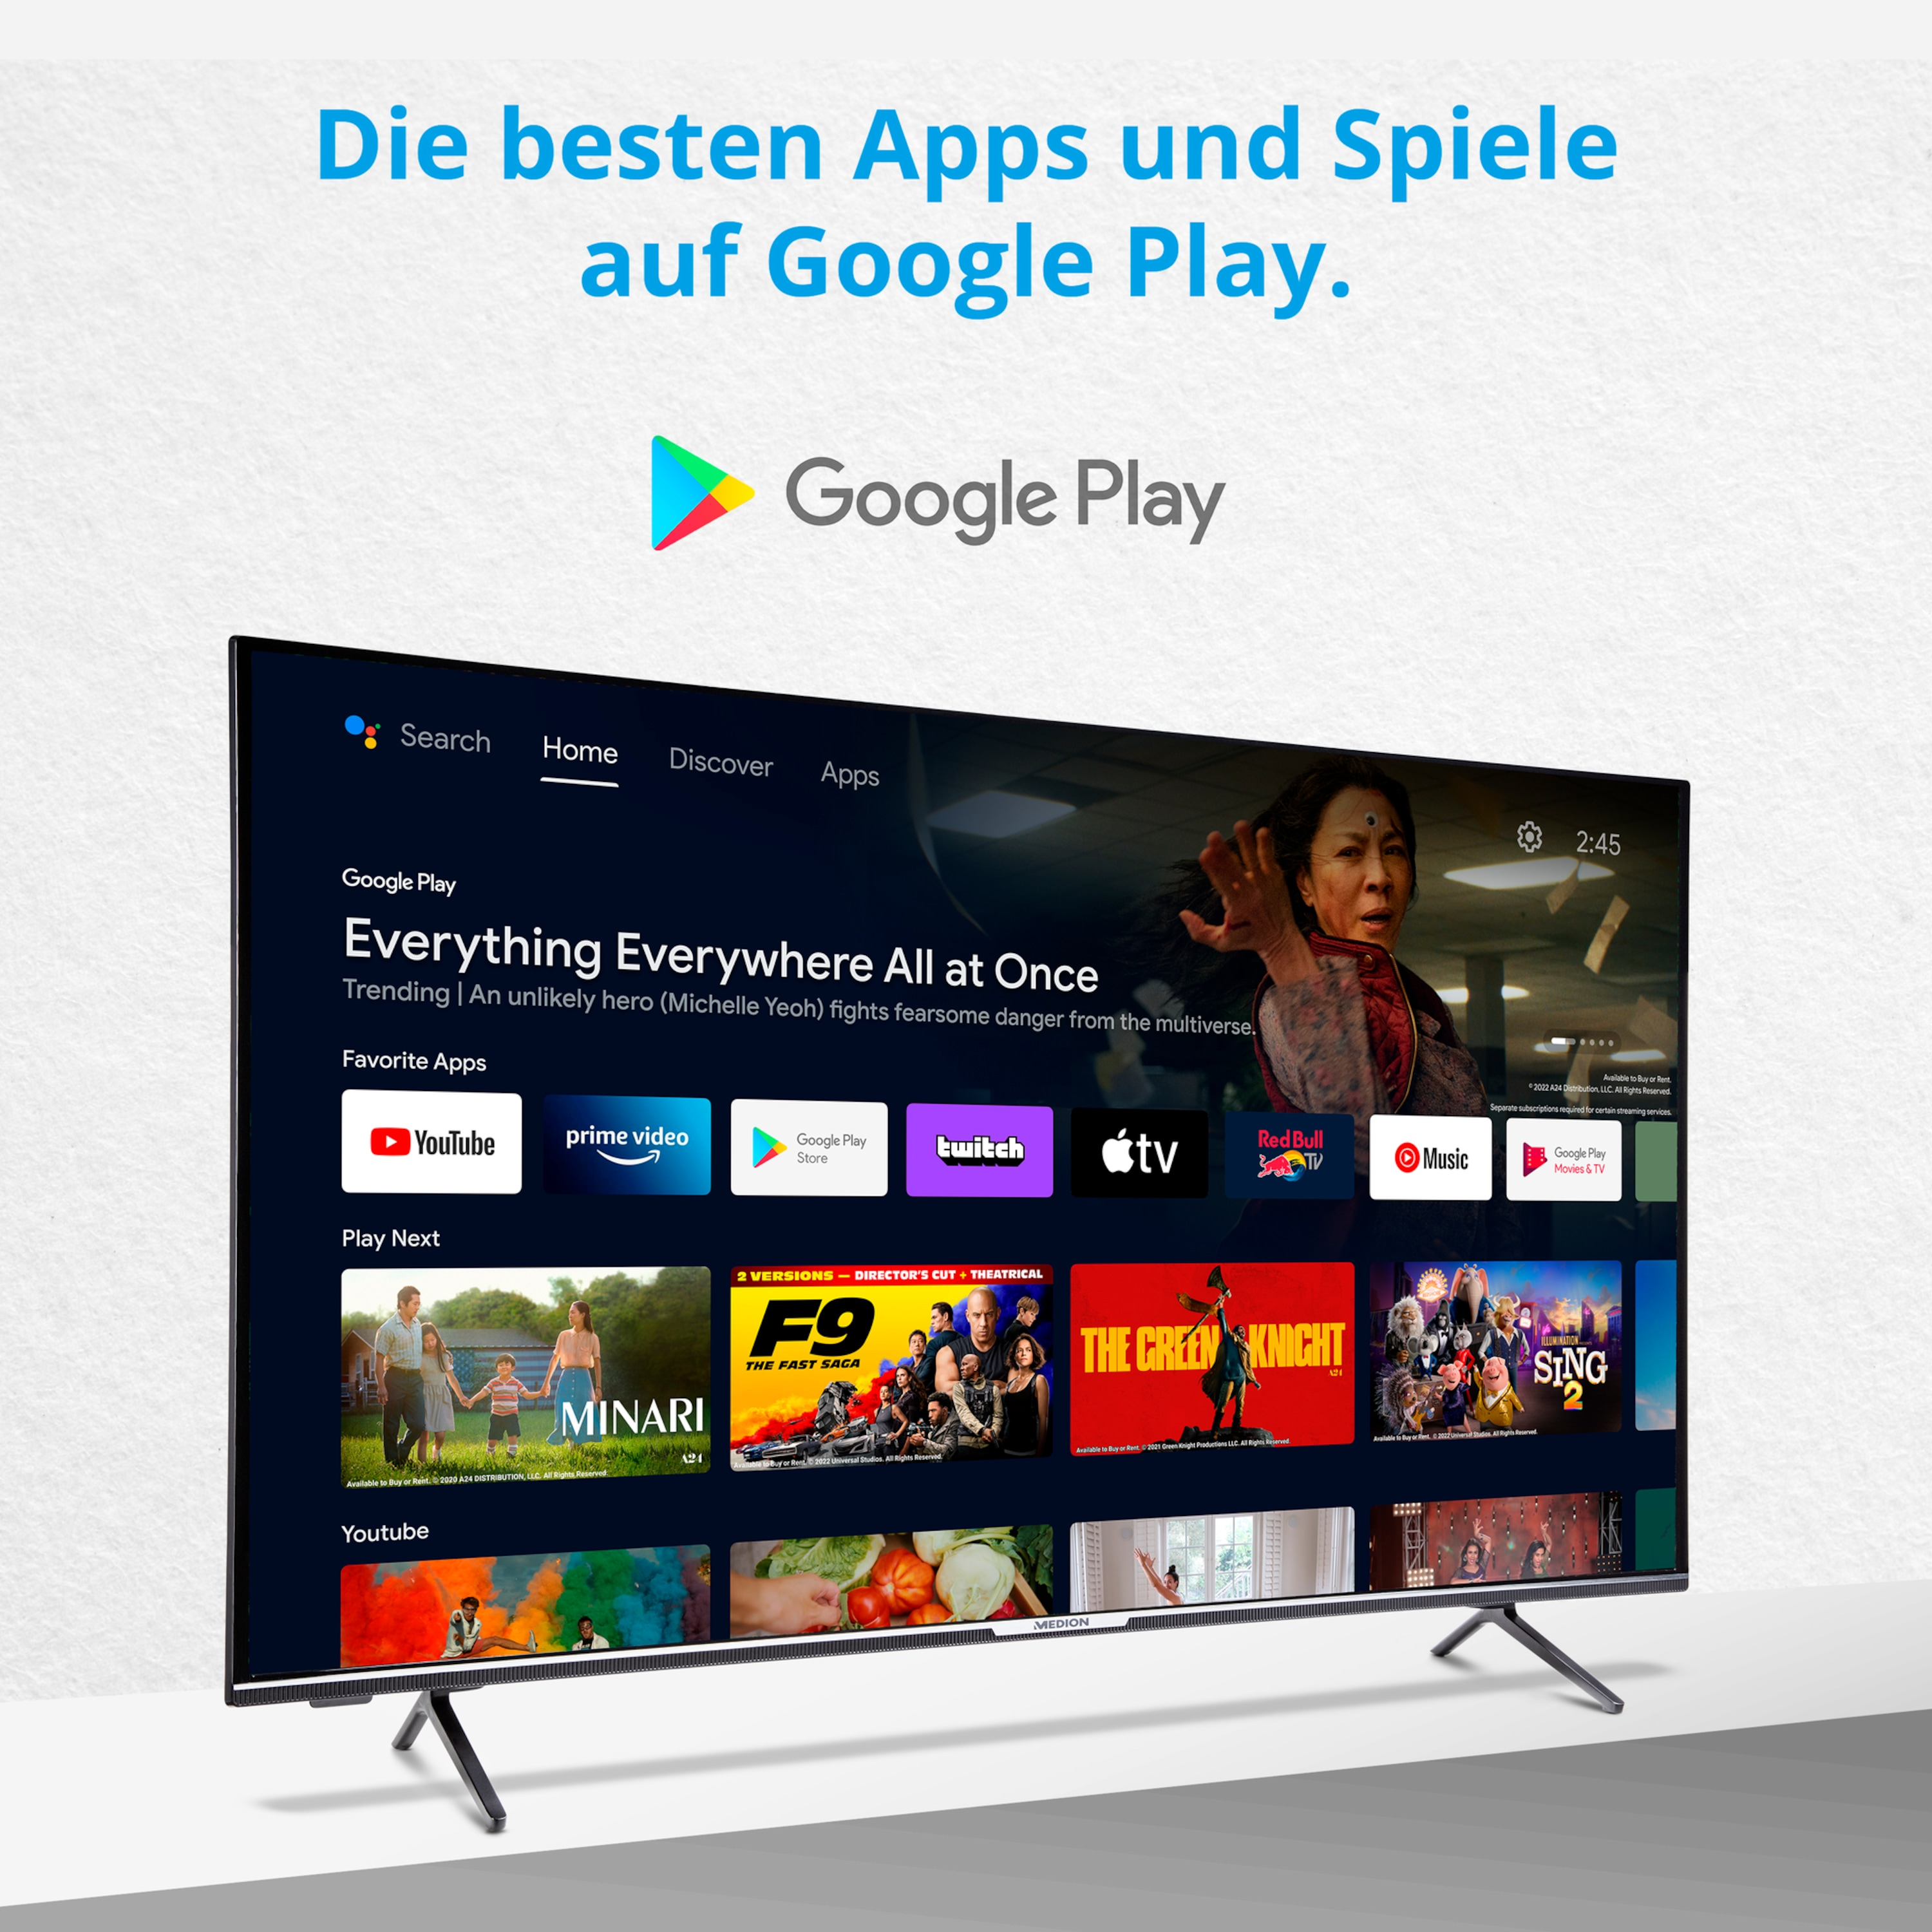 MEDION LIFE® P14371 Fernseher (Flat, 42,5 Zoll 108 cm, Android) Full-HD, 